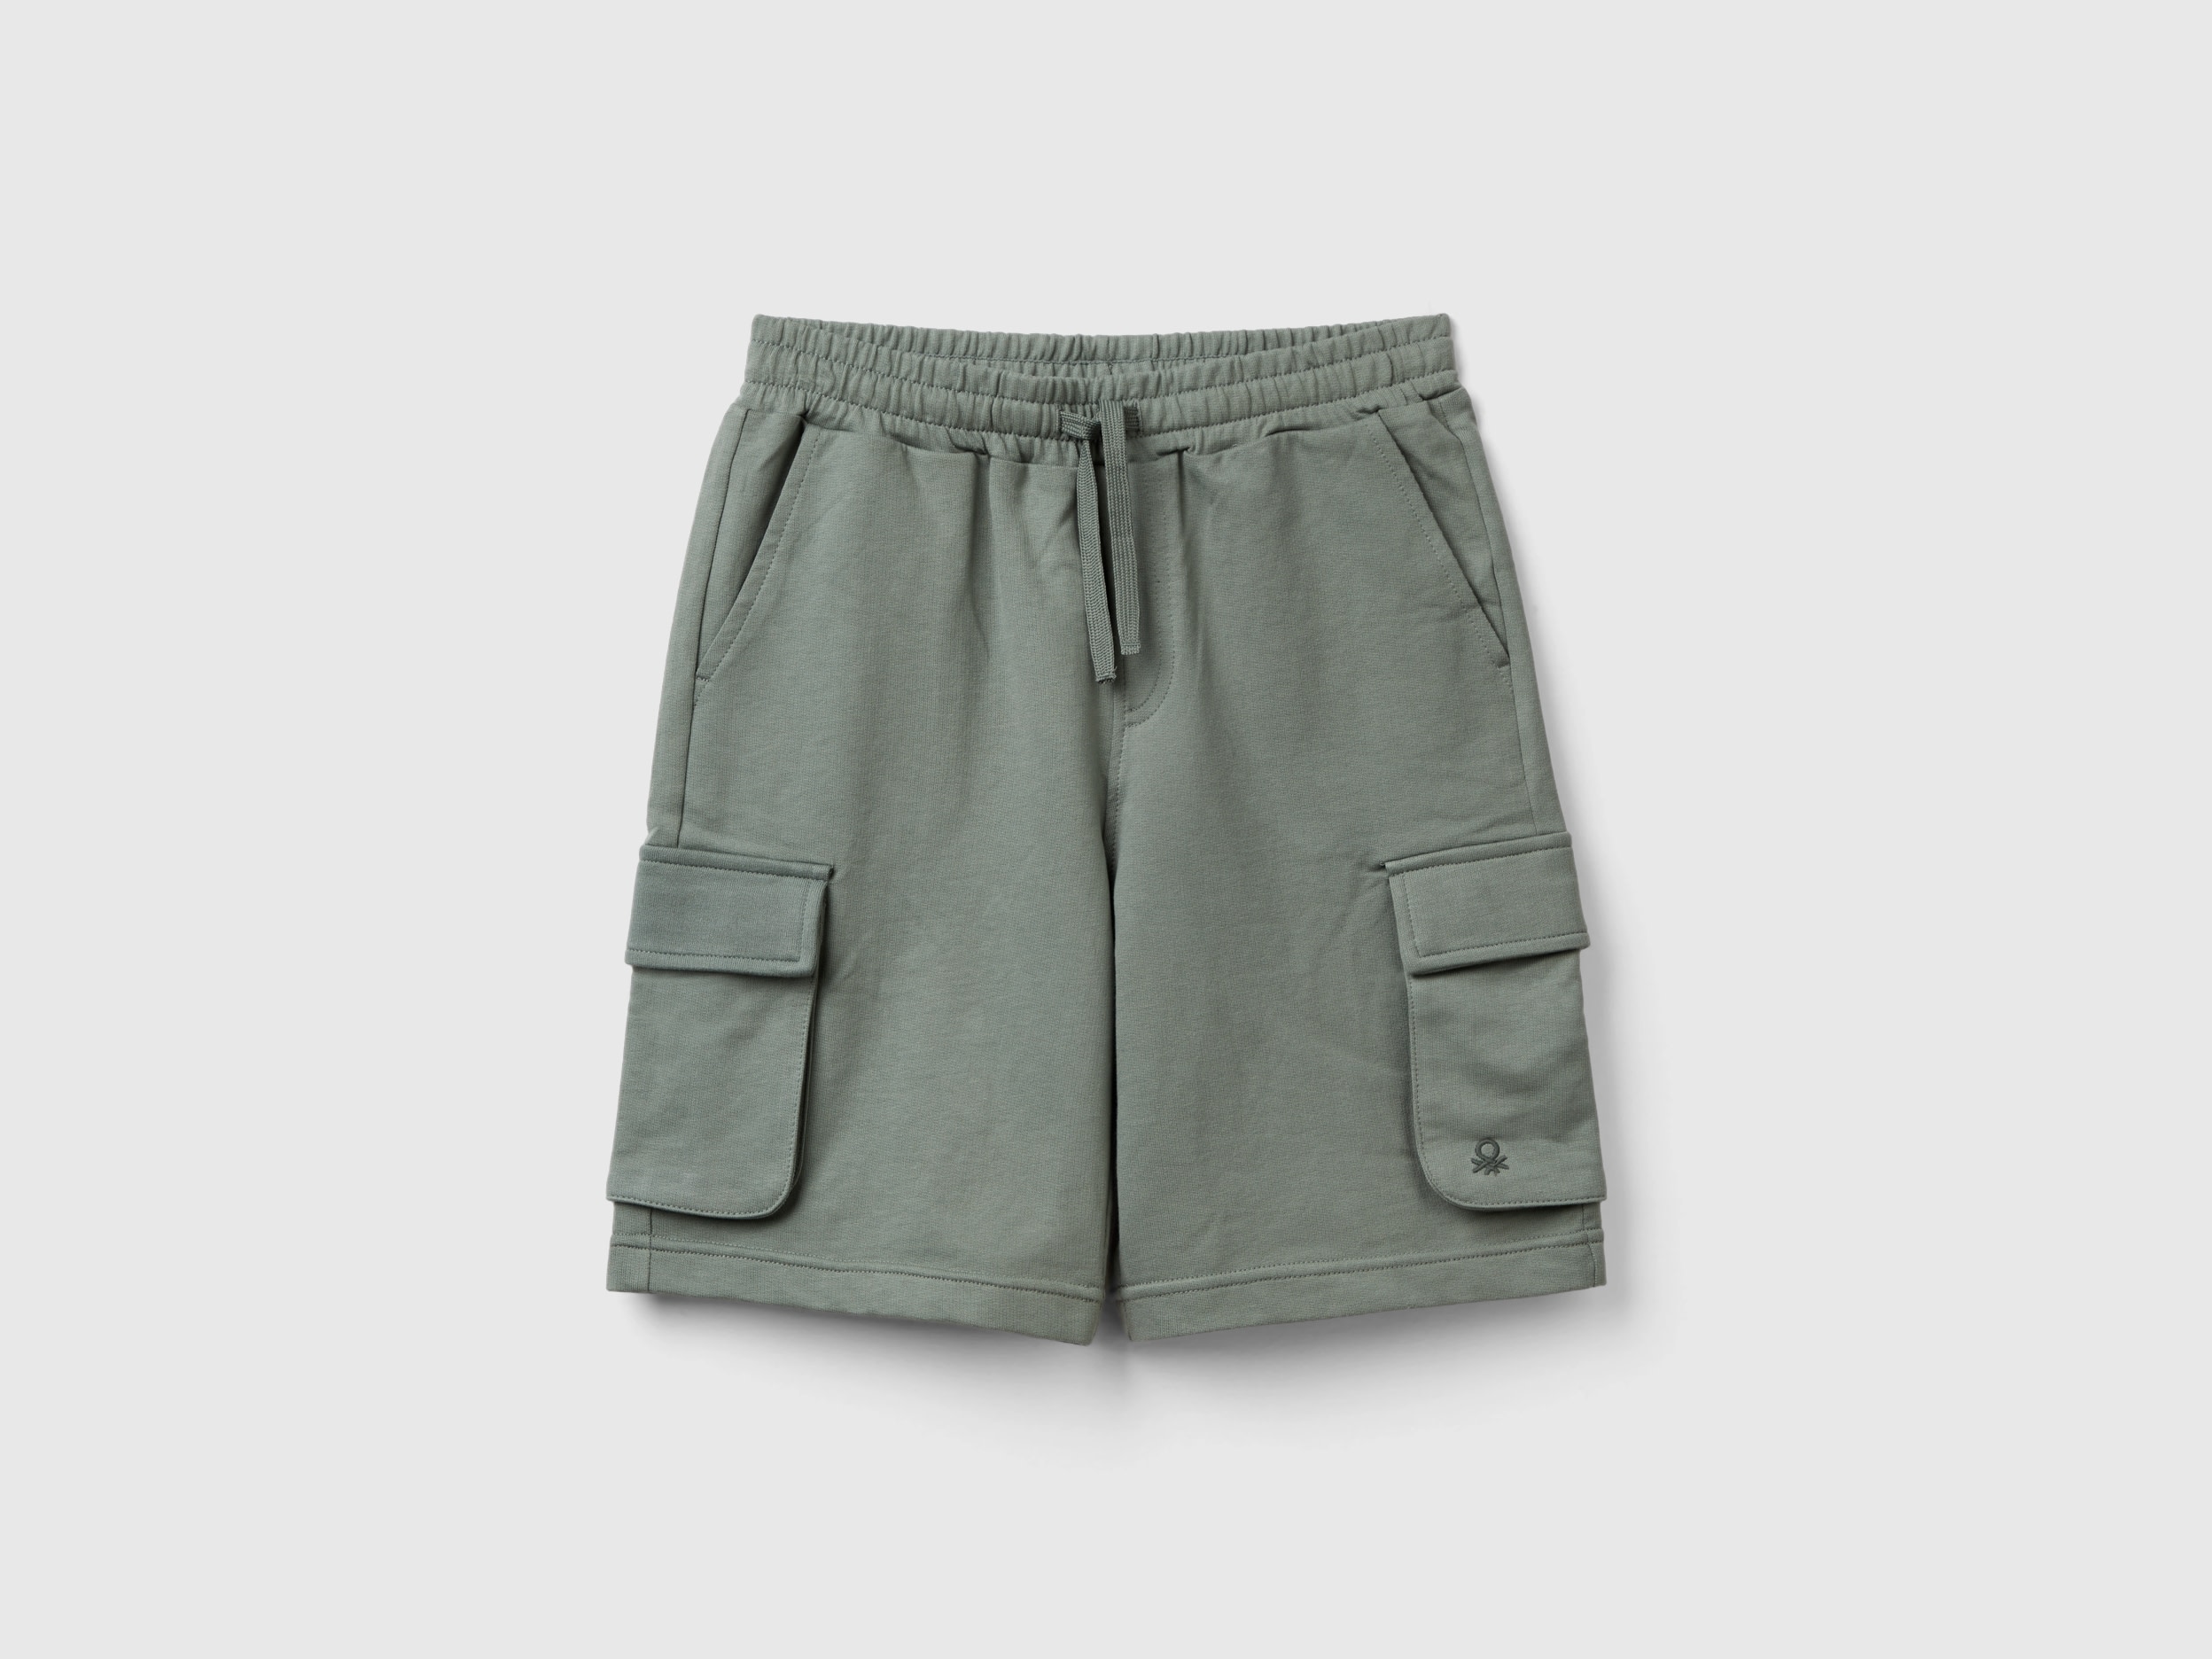 Image of Benetton, Cargo Shorts In Light Sweat Fabric, size 3XL, Military Green, Kids